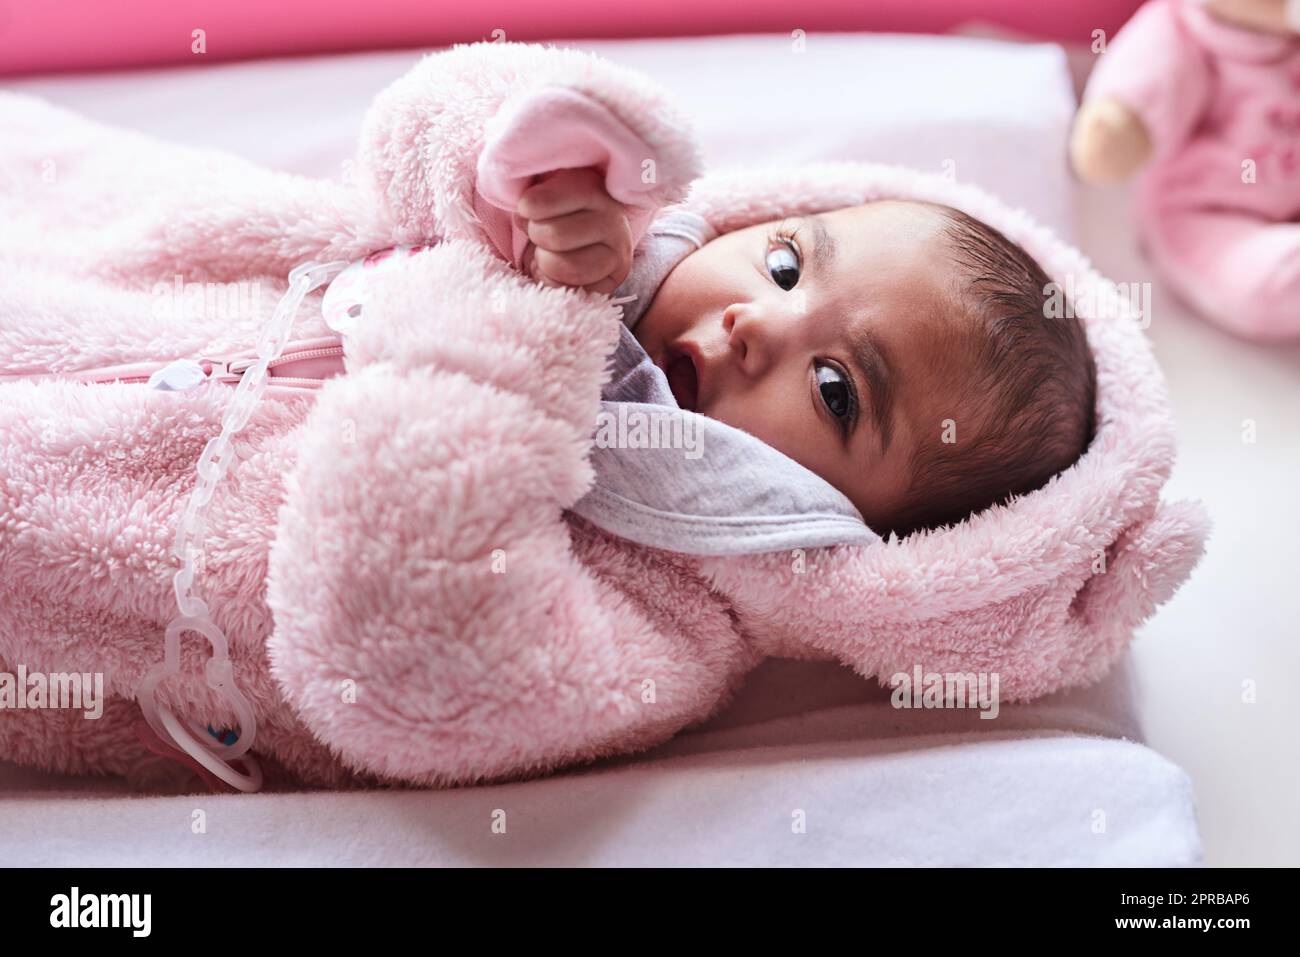 I think my name is Cute, everyone calls me that. an adorable baby girl on a diaper changing station at home. Stock Photo